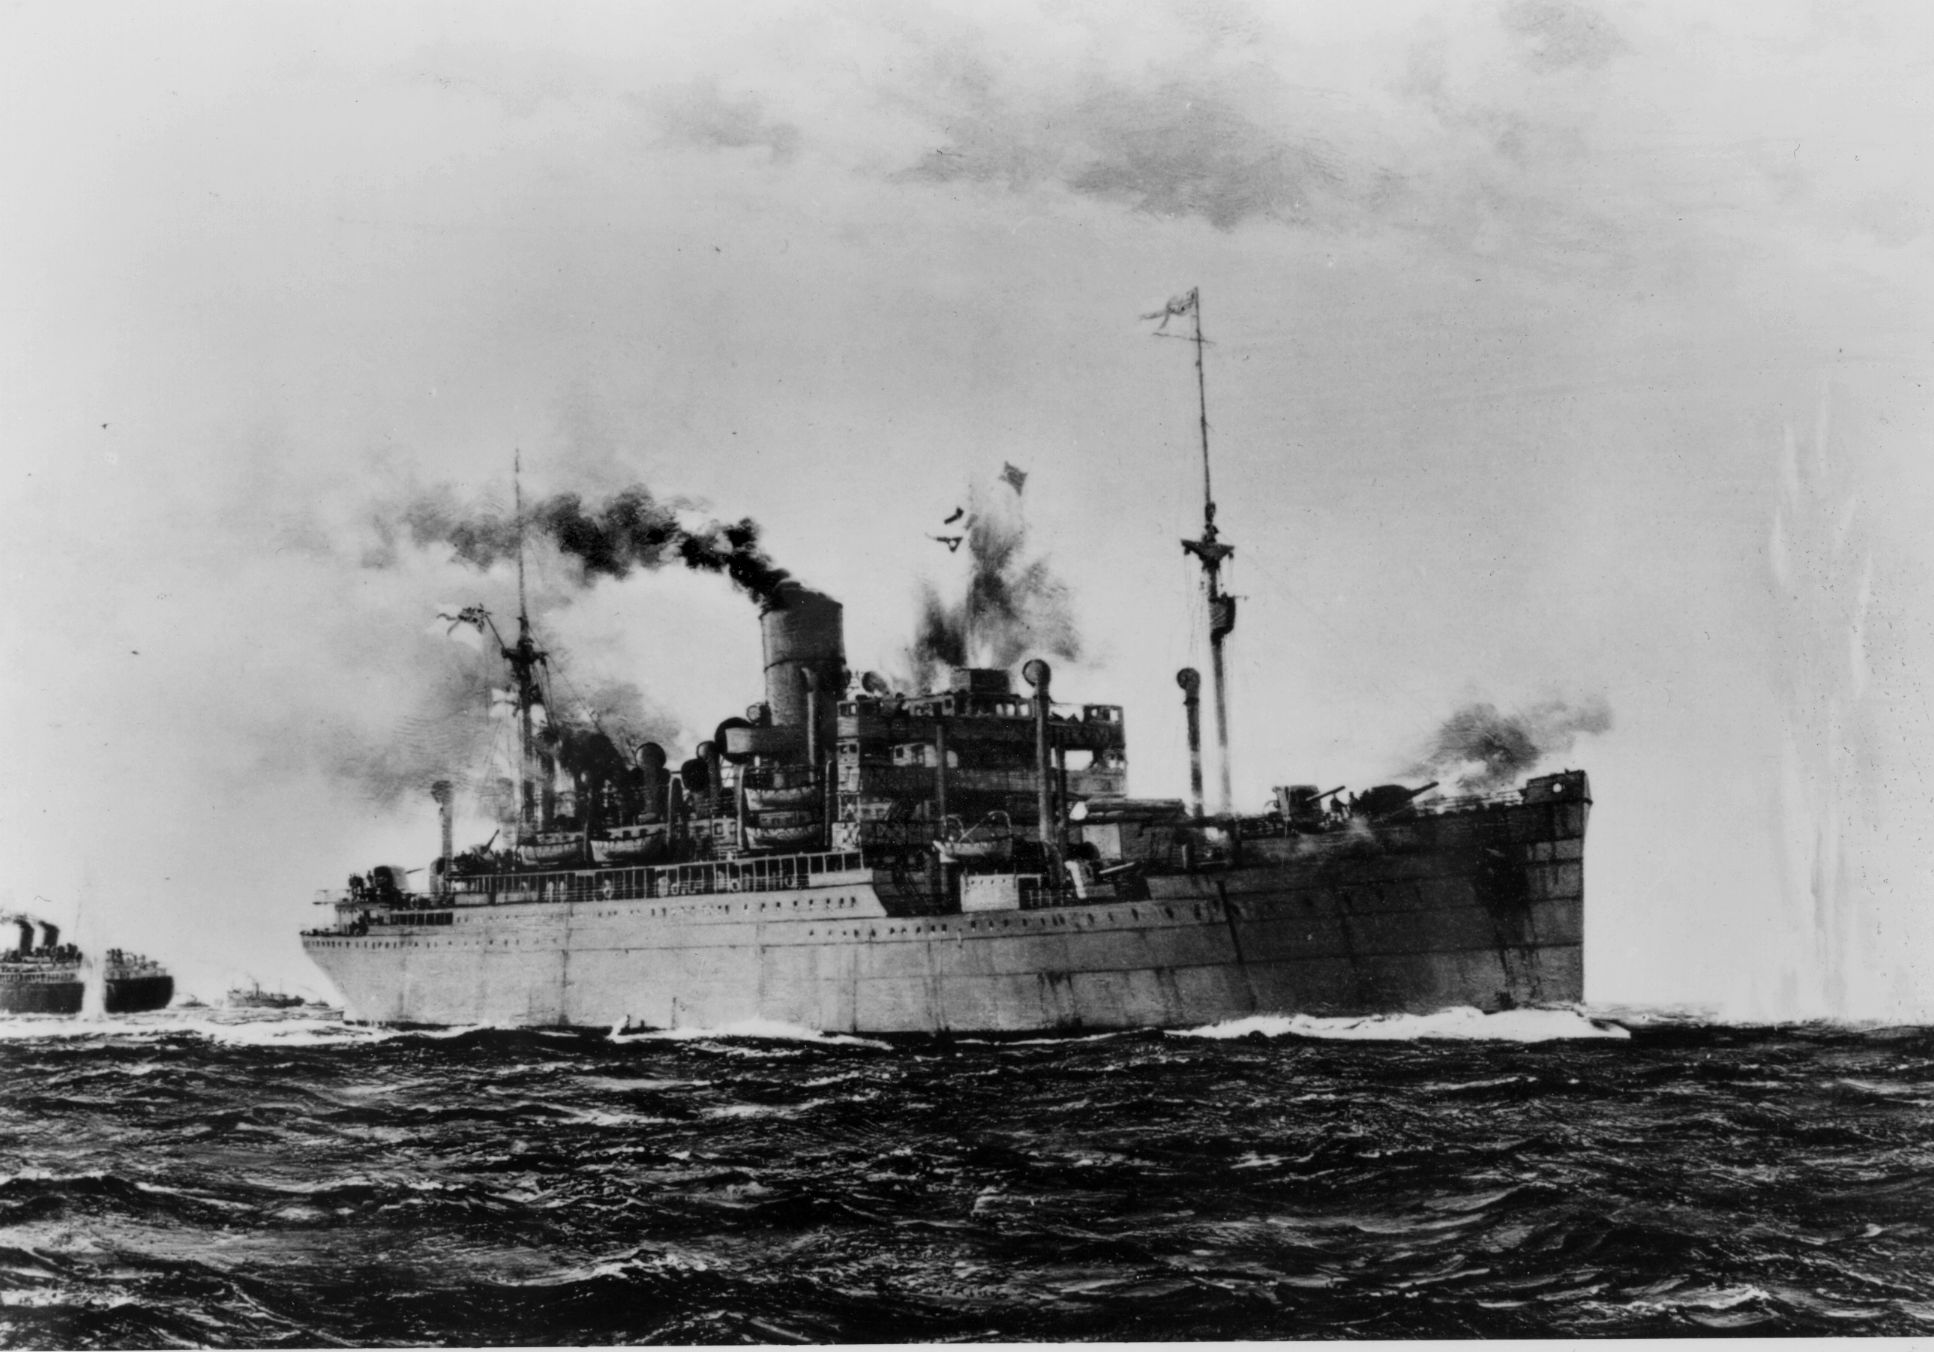 After conversion to an armed merchant cruiser, HMS Jervis Bay was escorting Convoy HGX84 on November 5, 1940, when the German pocket battleship Admiral Scheer came into view. The captain of Jervis Bay did his duty and defended the convoy to the last. 